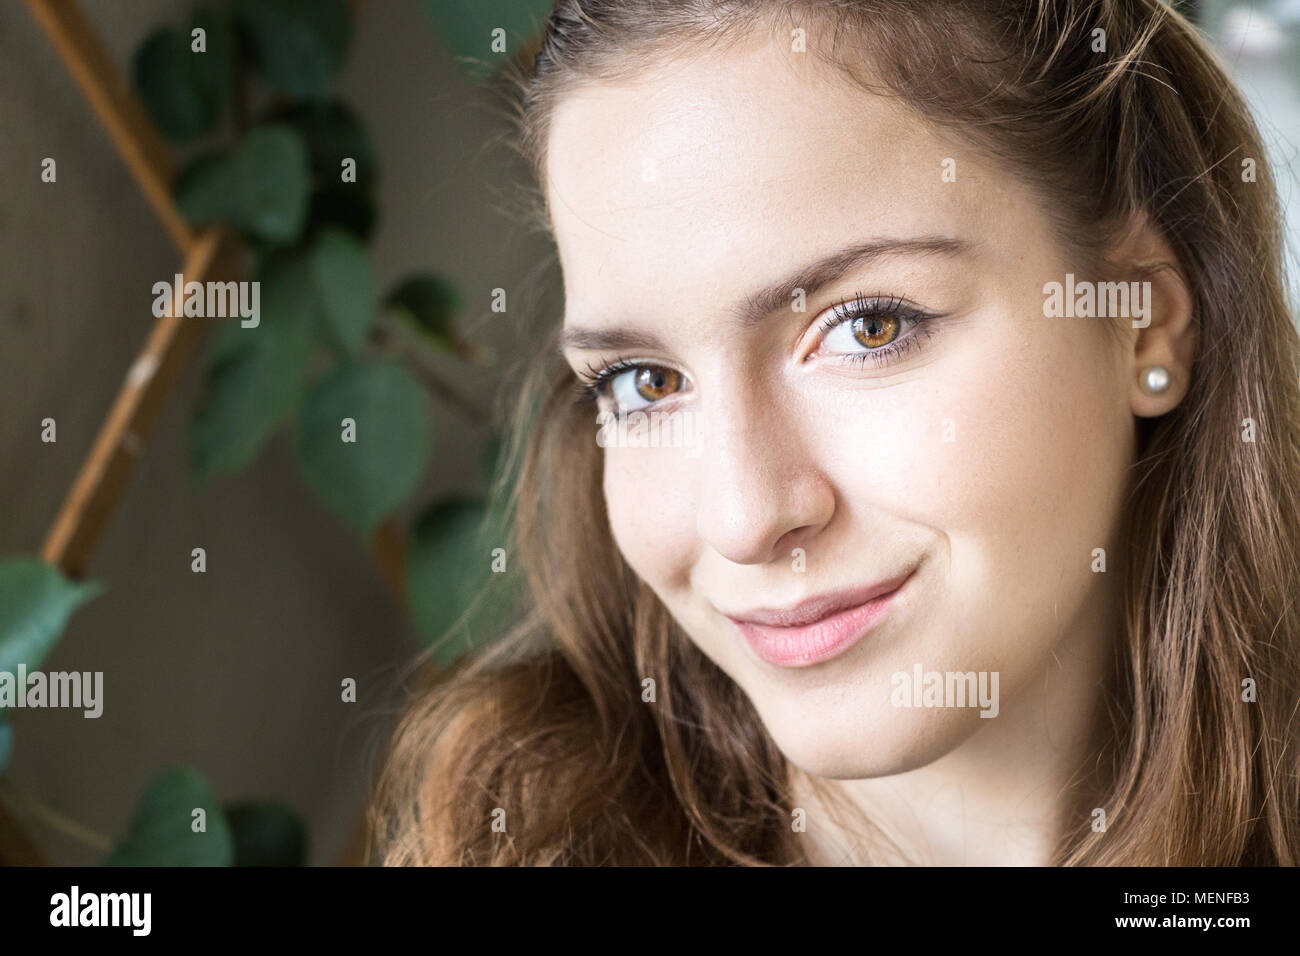 Portrait of a teenager girl, close up, looking at camera at home with sweet expression. Stock Photo